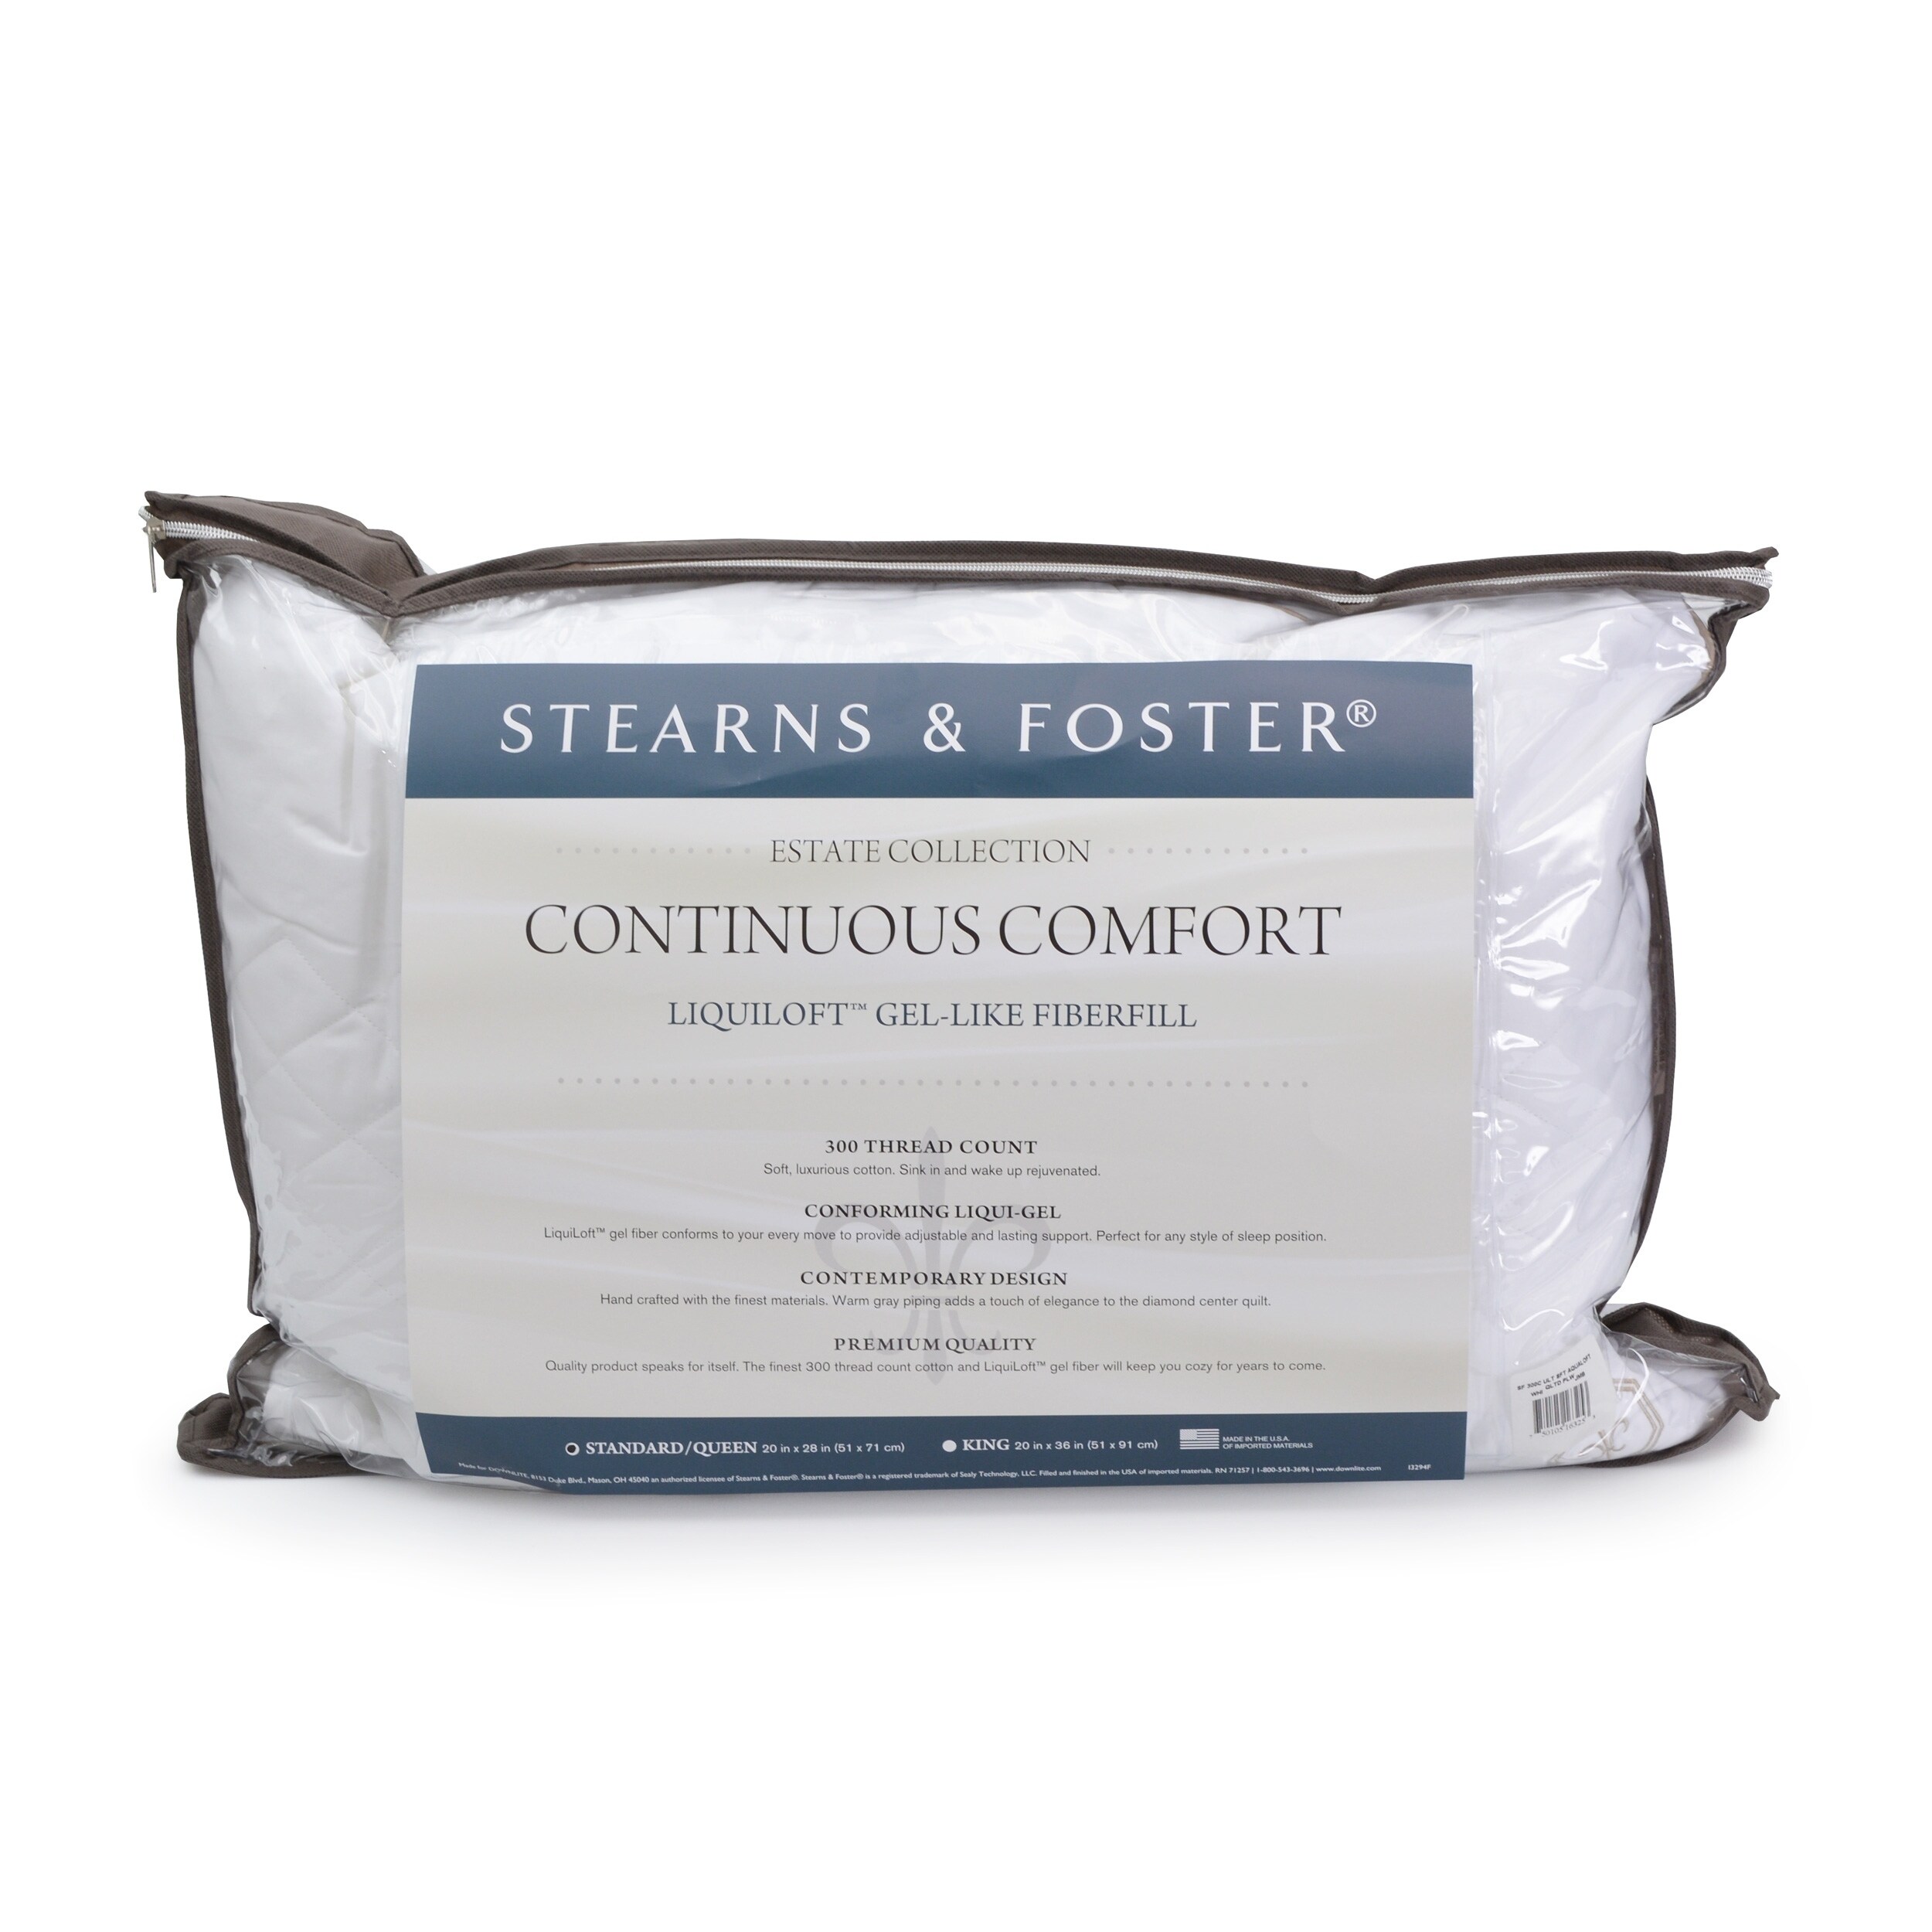 stearns and foster continuous comfort pillow liquiloft